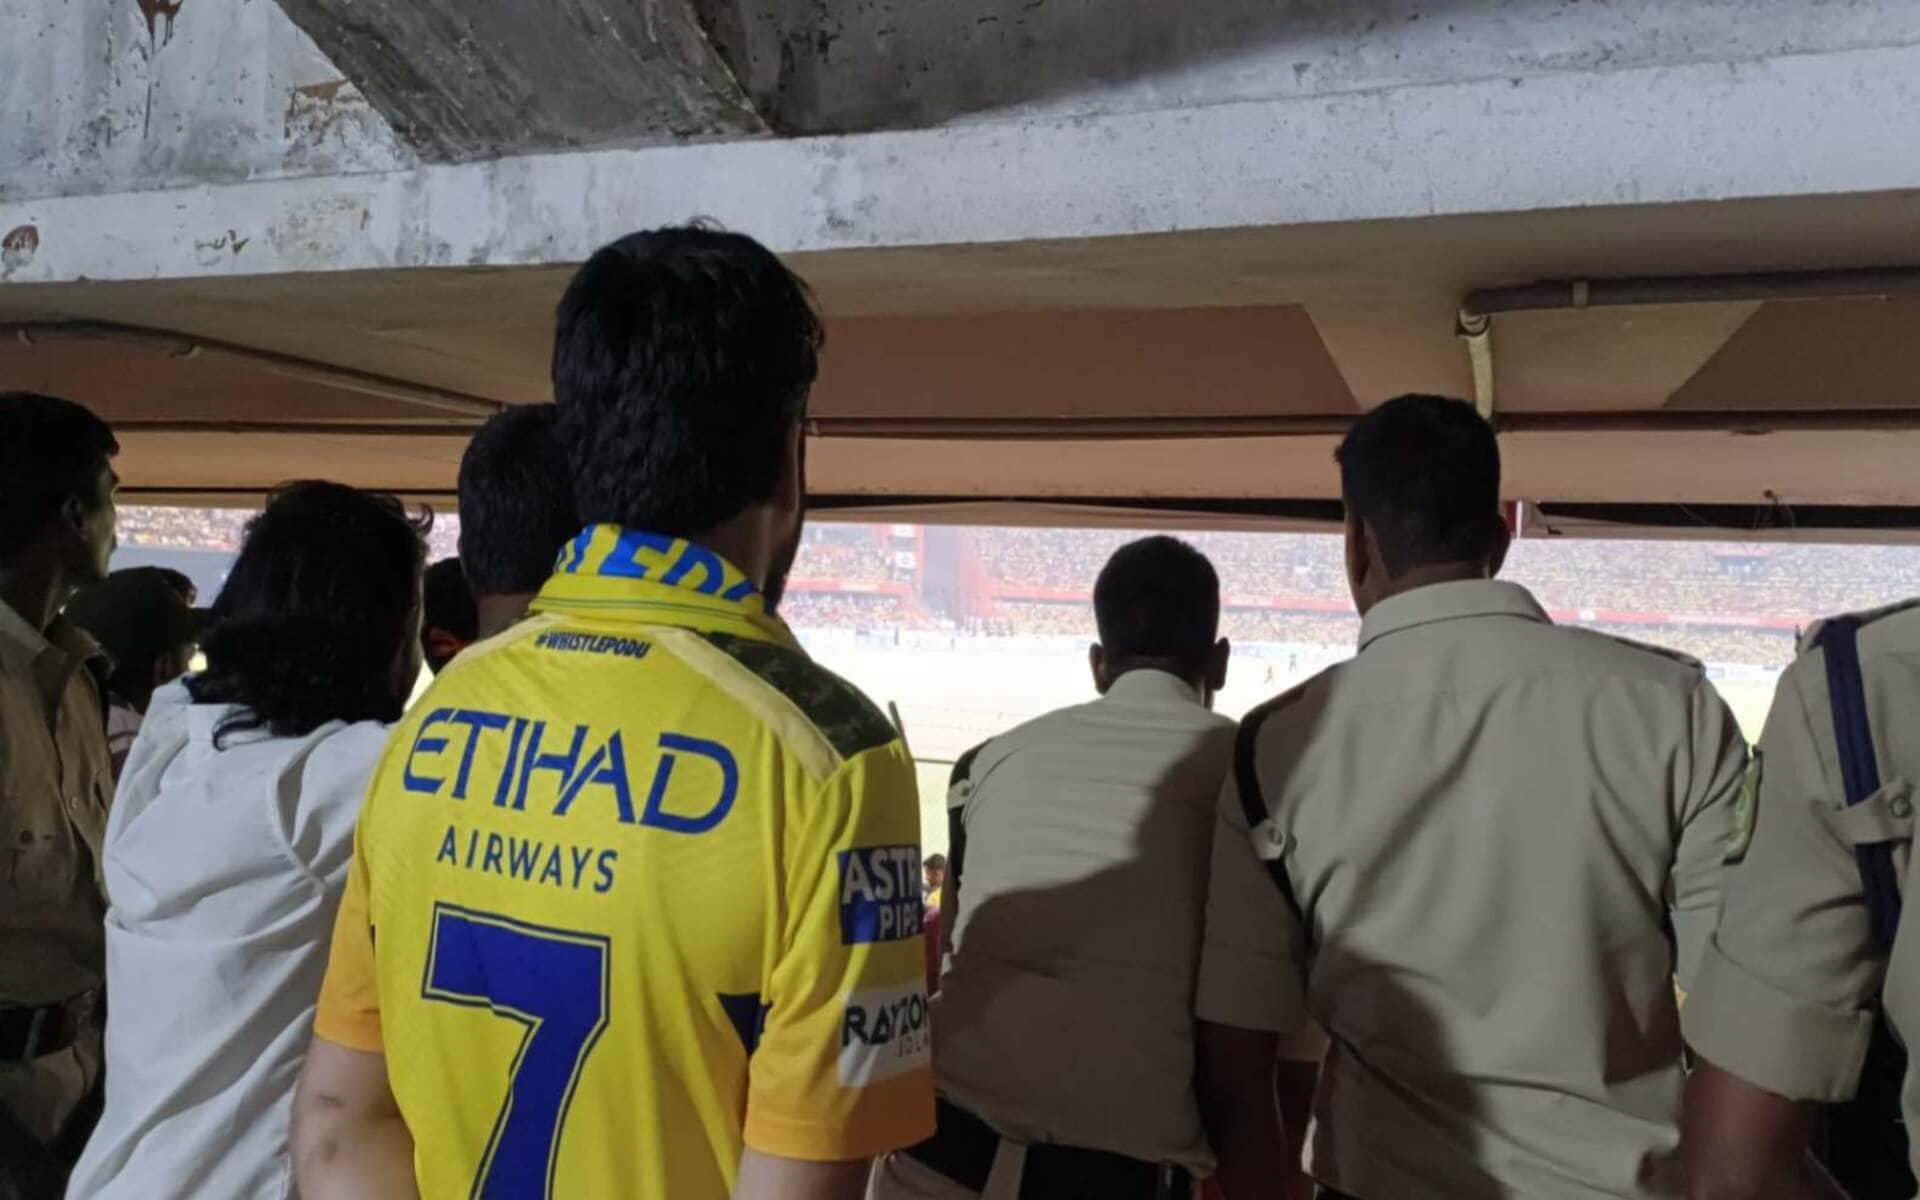 CSK Fan's Seat Robbed in Hyderabad, Demands Refund From BCCI